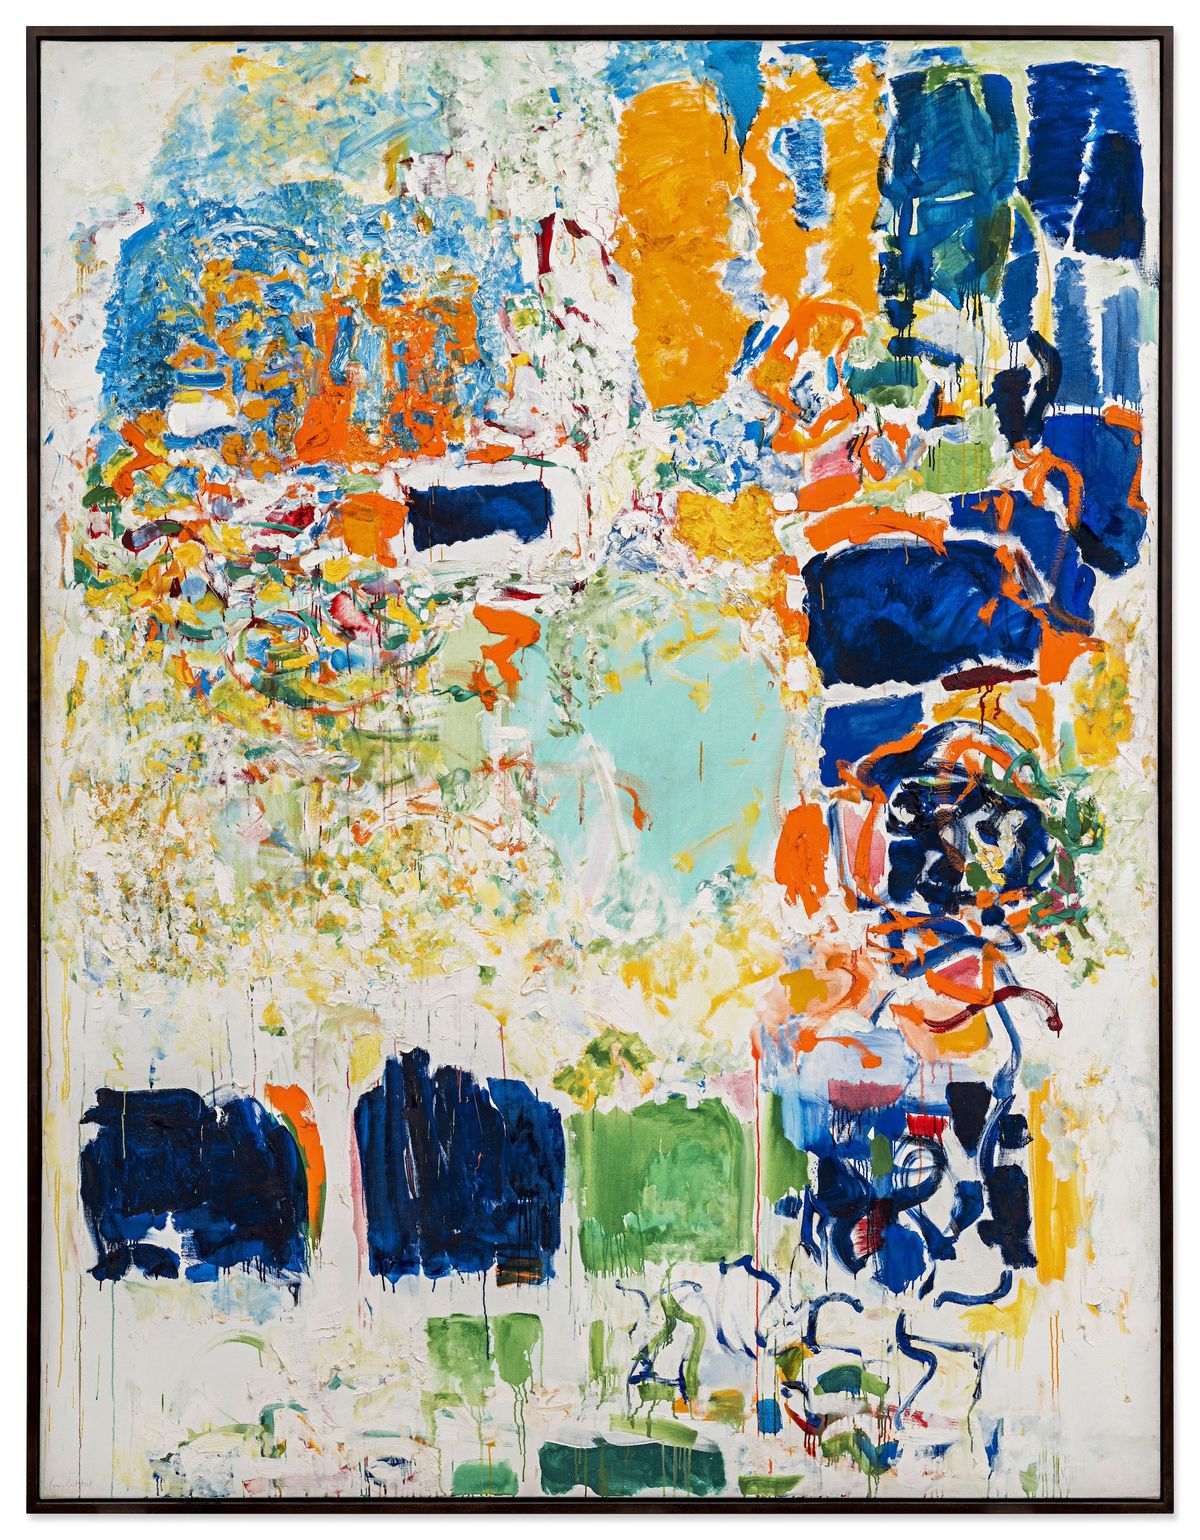 Joan Mitchell, Noon, around 1969, private collection © Estate of Joan Mitchell